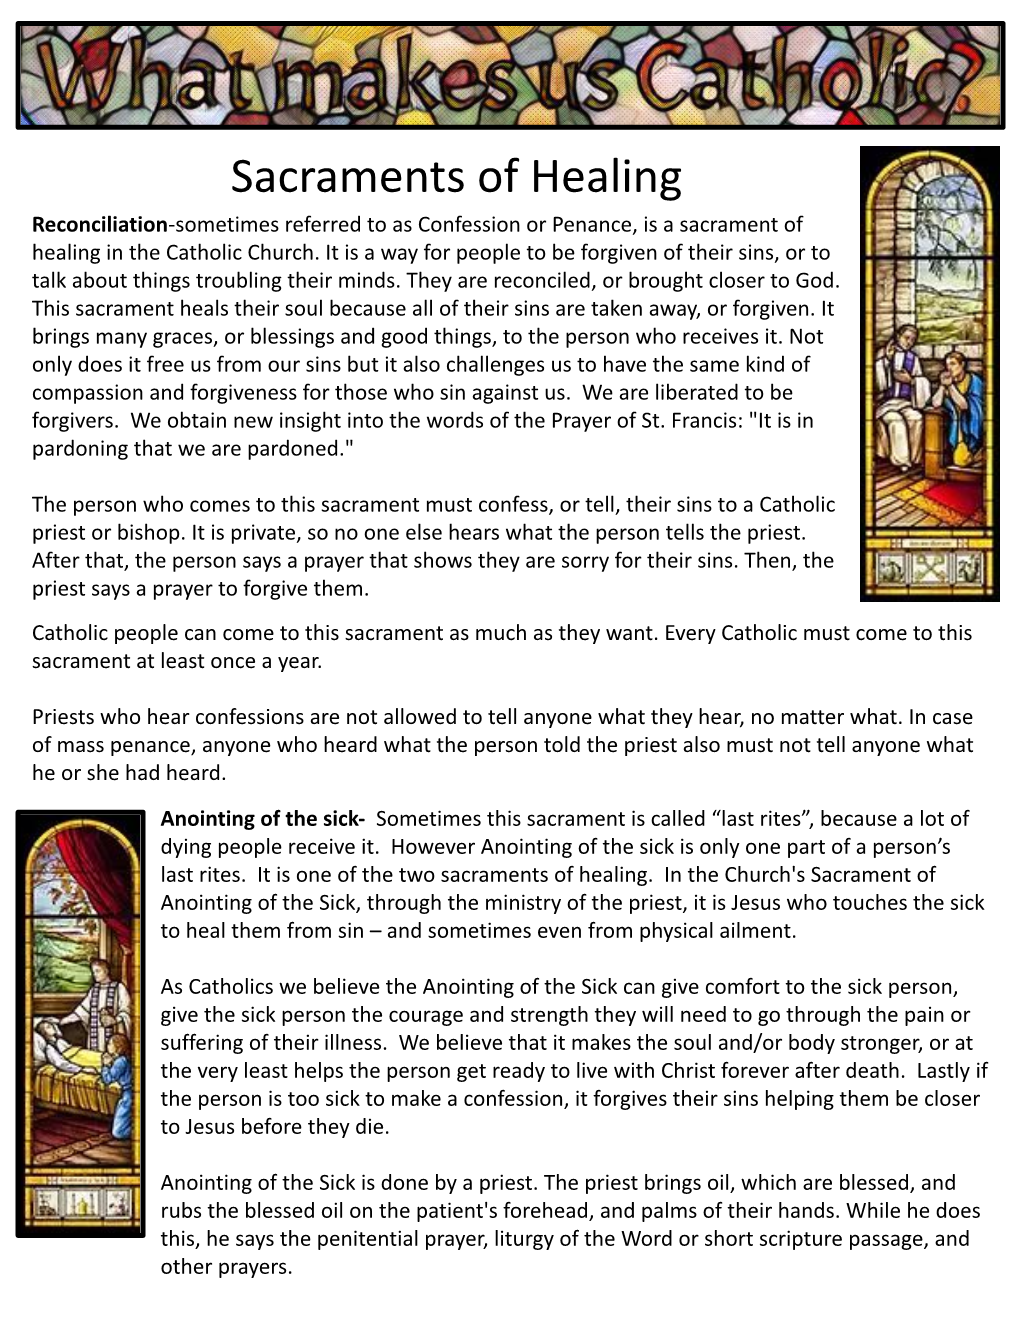 Sacraments of Healing Reconciliation-Sometimes Referred to As Confession Or Penance, Is a Sacrament of Healing in the Catholic Church